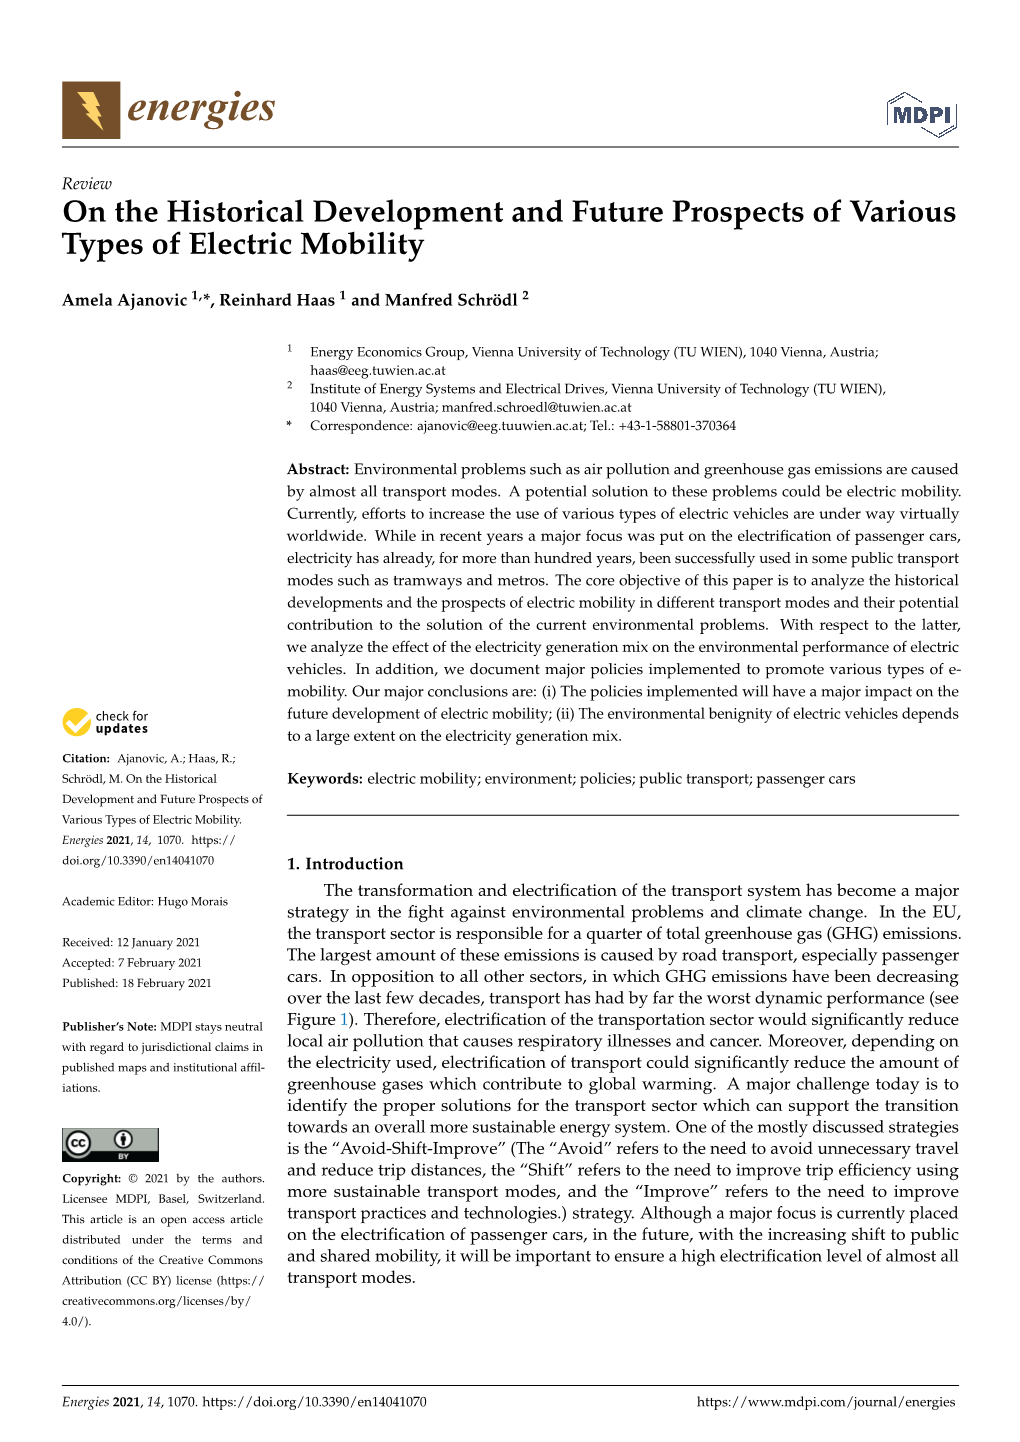 On the Historical Development and Future Prospects of Various Types of Electric Mobility